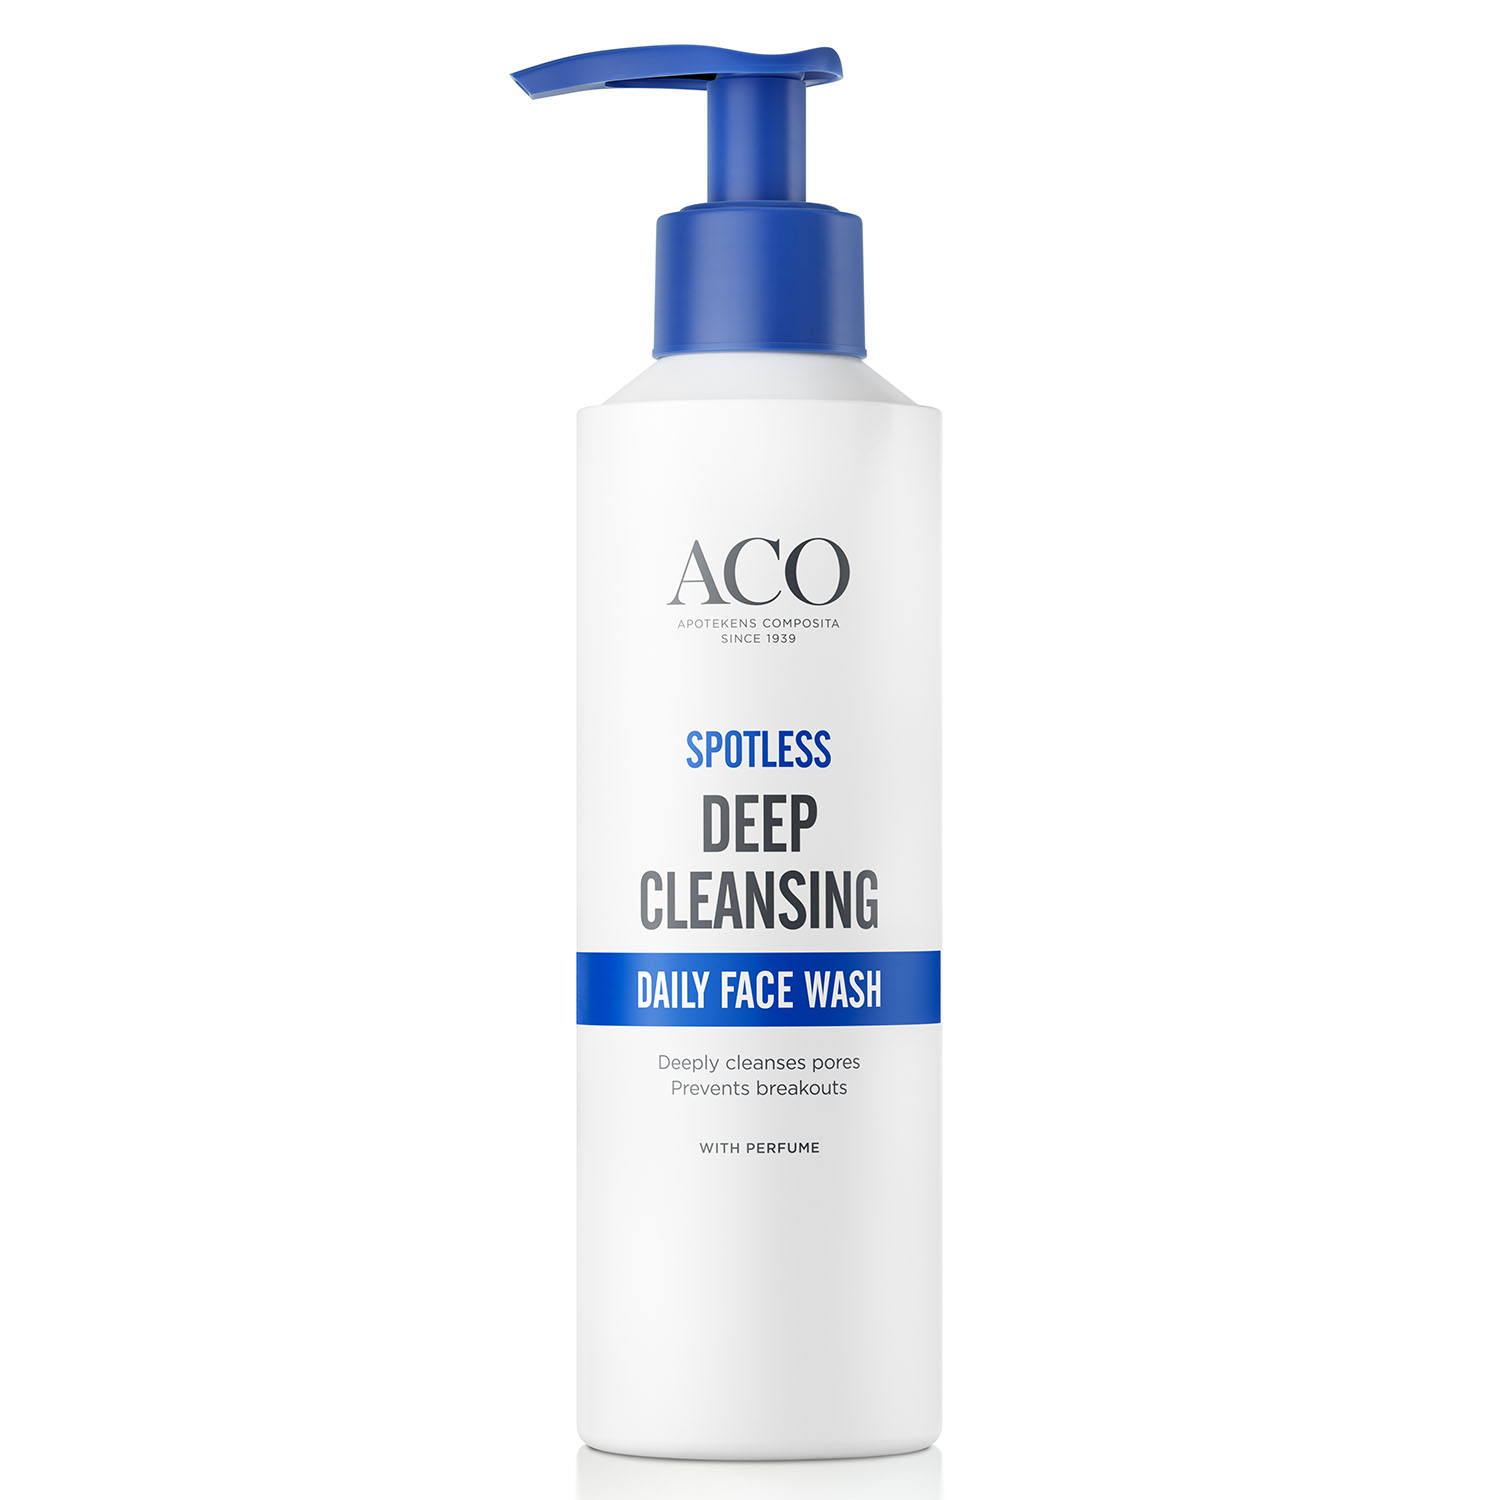 ACO Spotless Deep Cleansing Daily Face Wash, 200 ml